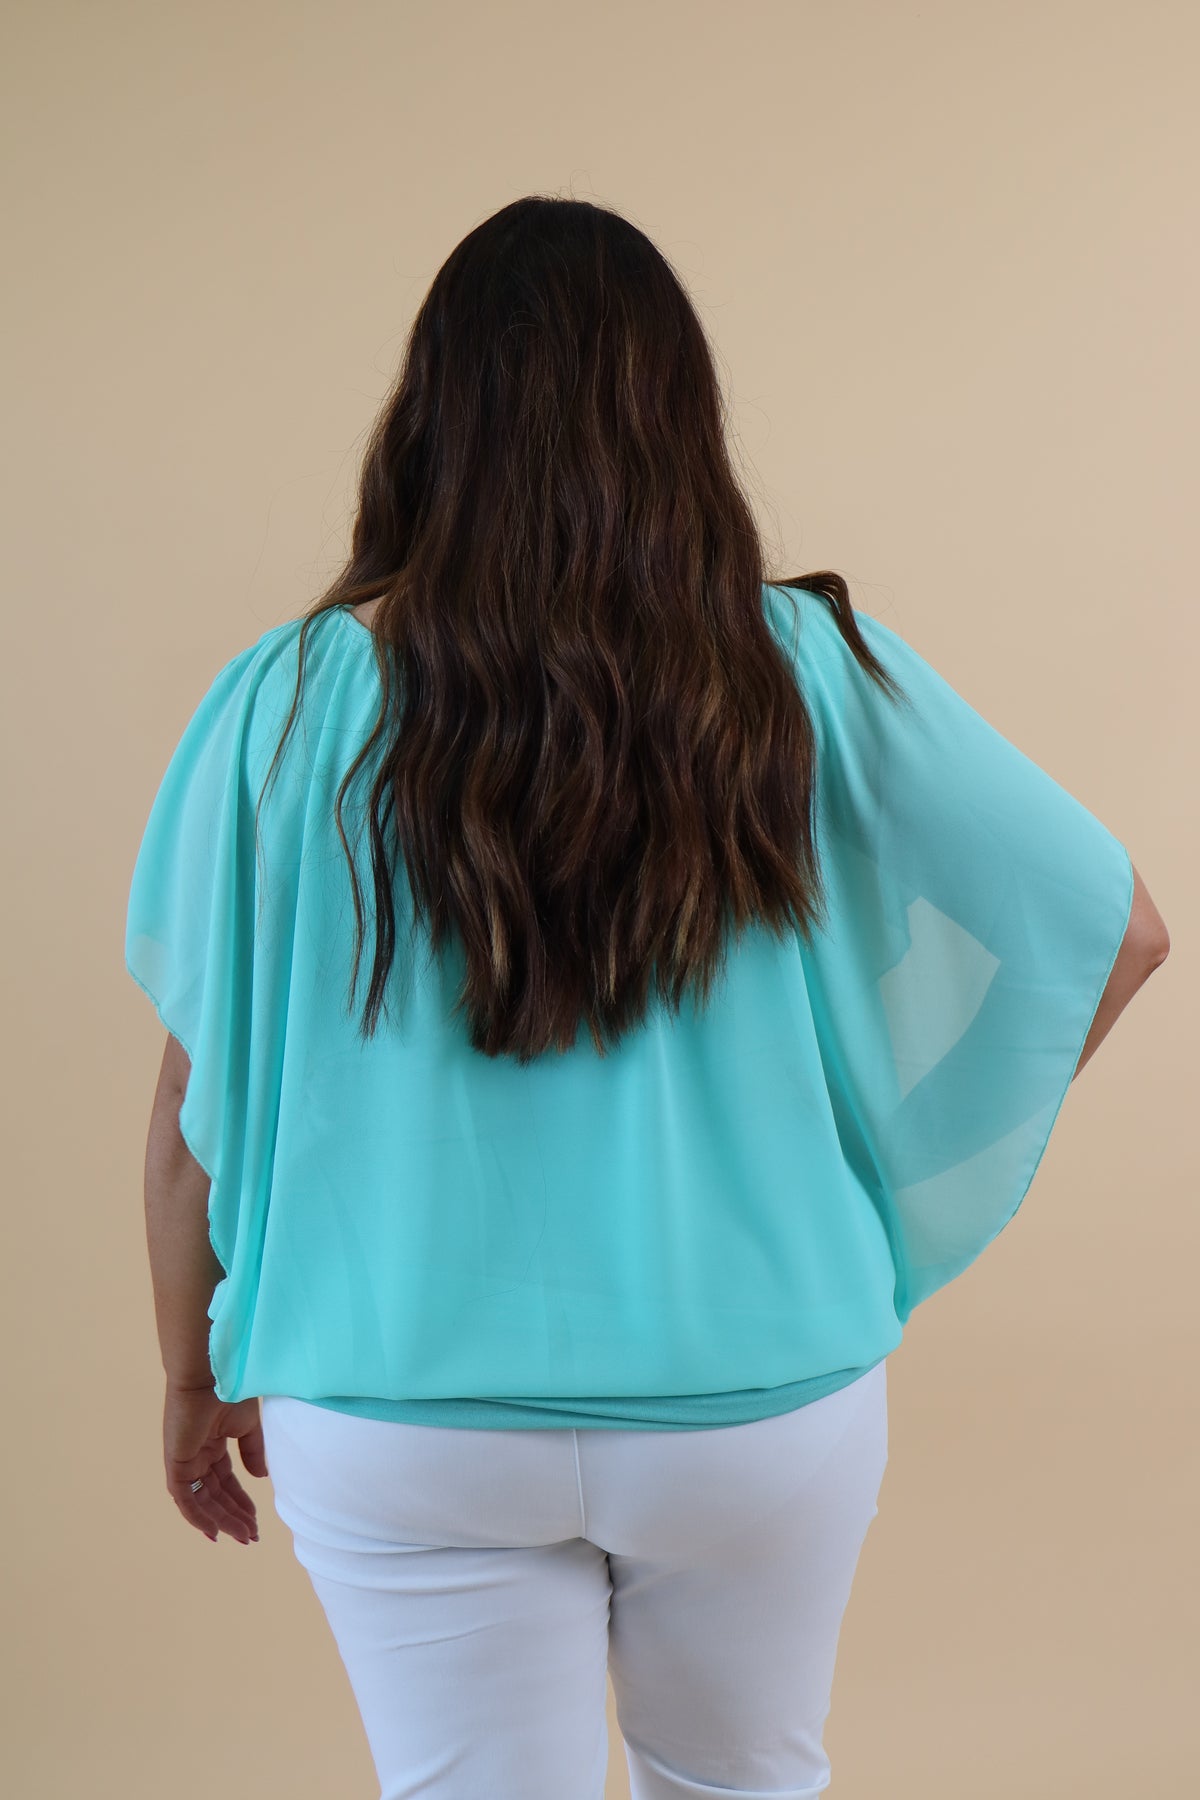 Magic Blouse in Mint Size 1